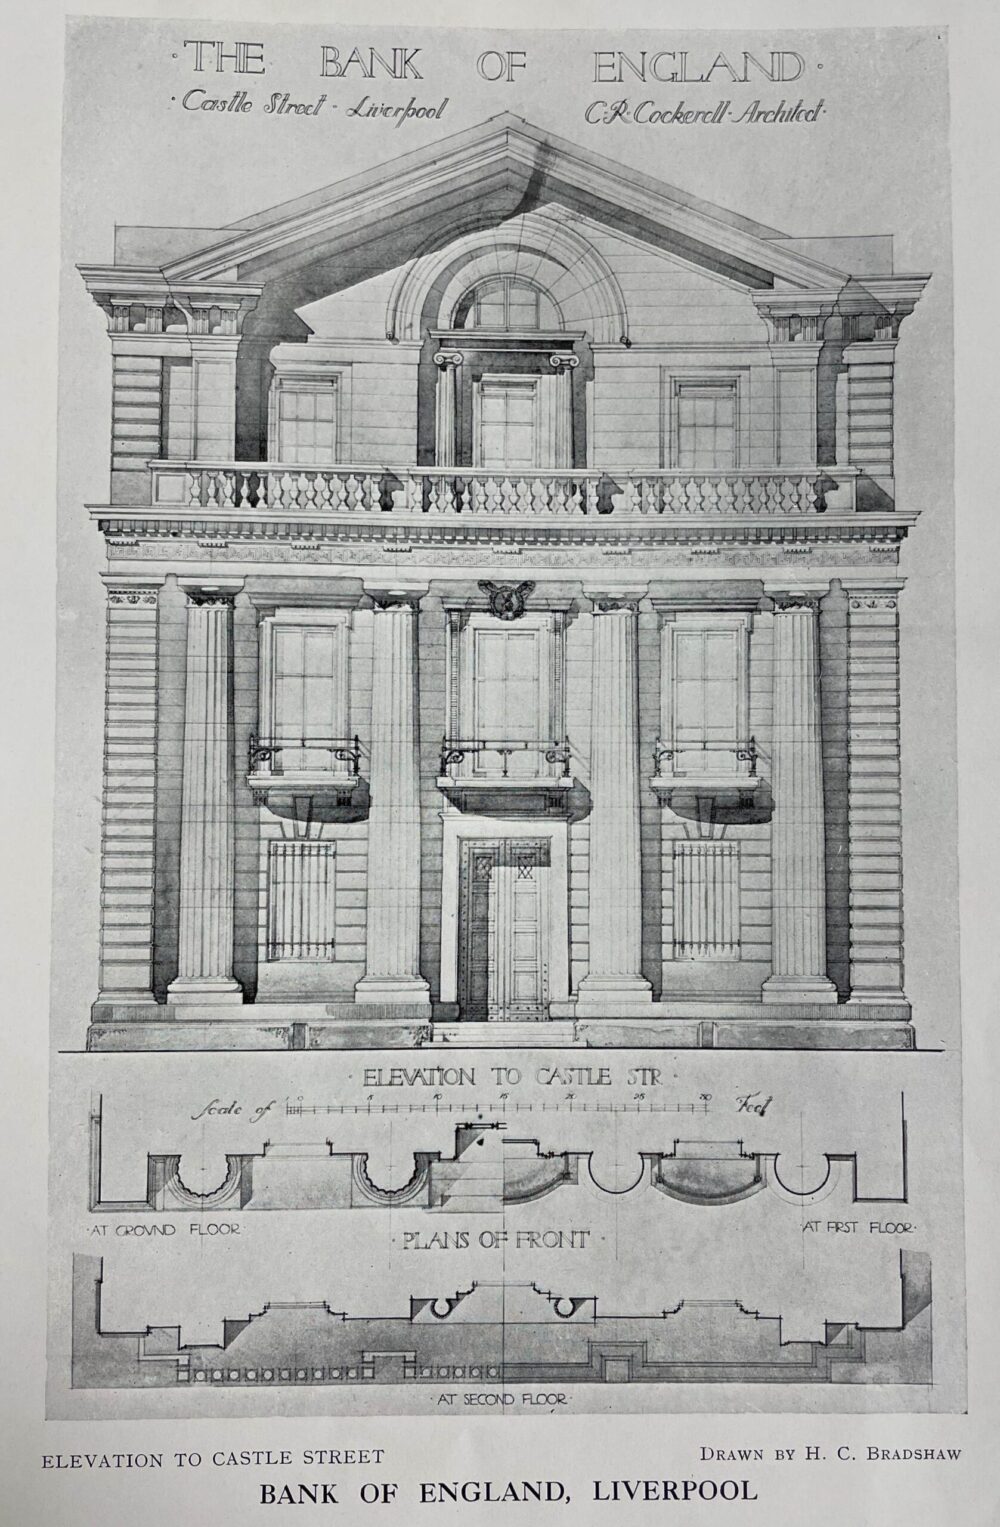 Sketch of the former Bank of England Liverpool branch, 31 Castle Street. Image provided by The Ivy